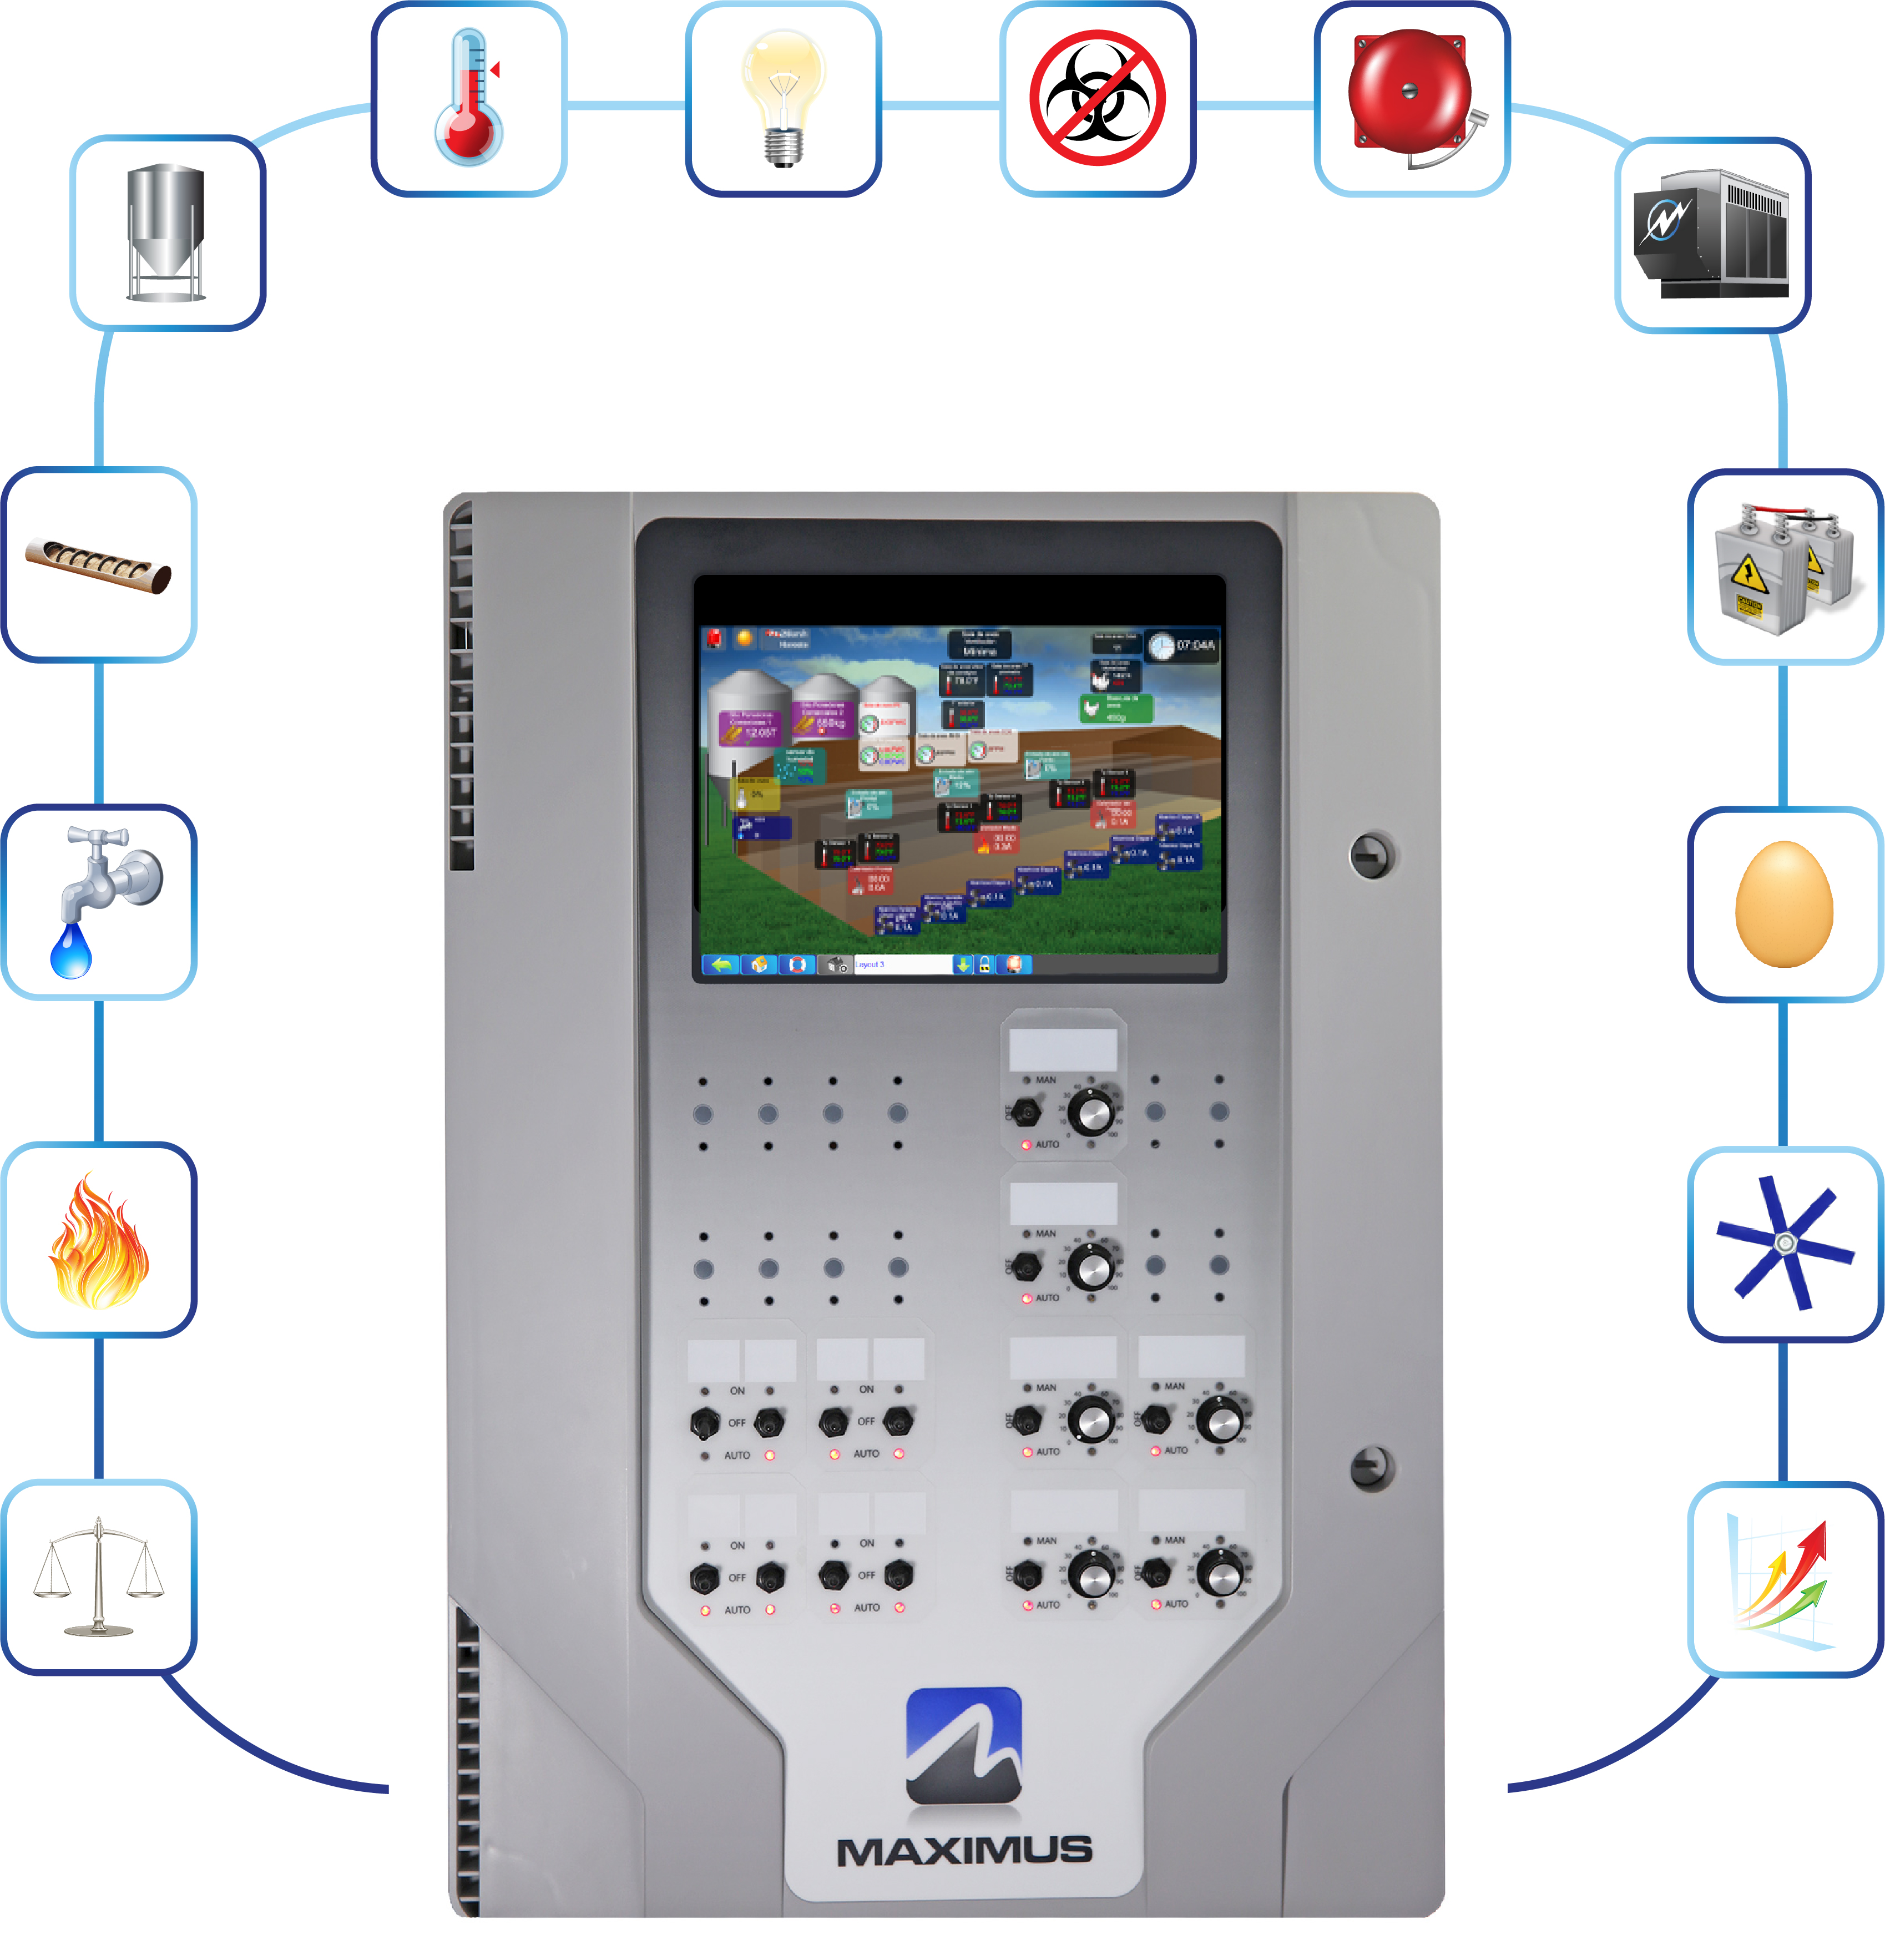 The MAXIMUS controller monitors the poultry house environmental conditions.